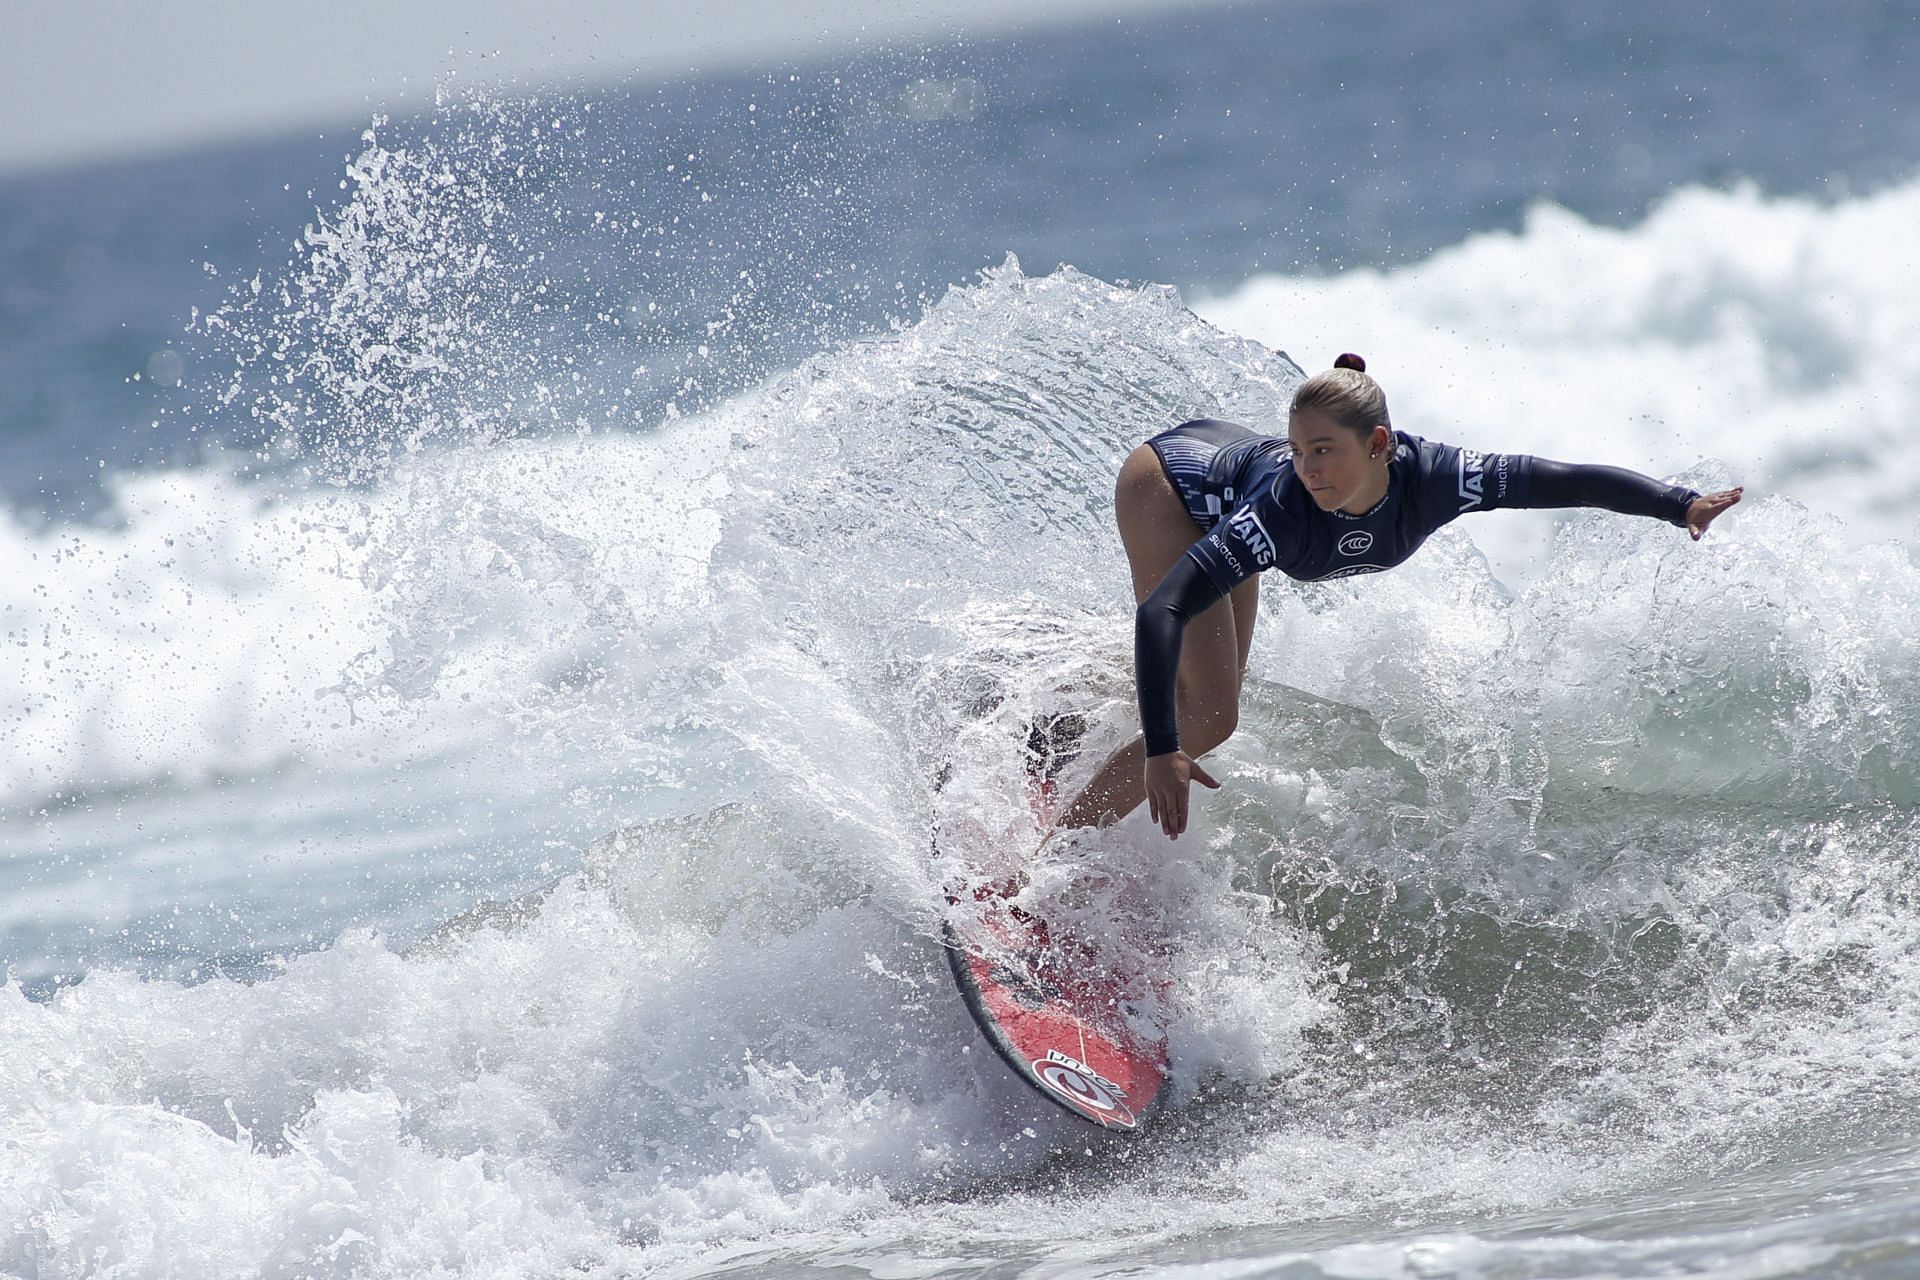 2019 VANS US Open of Surfing competition. 